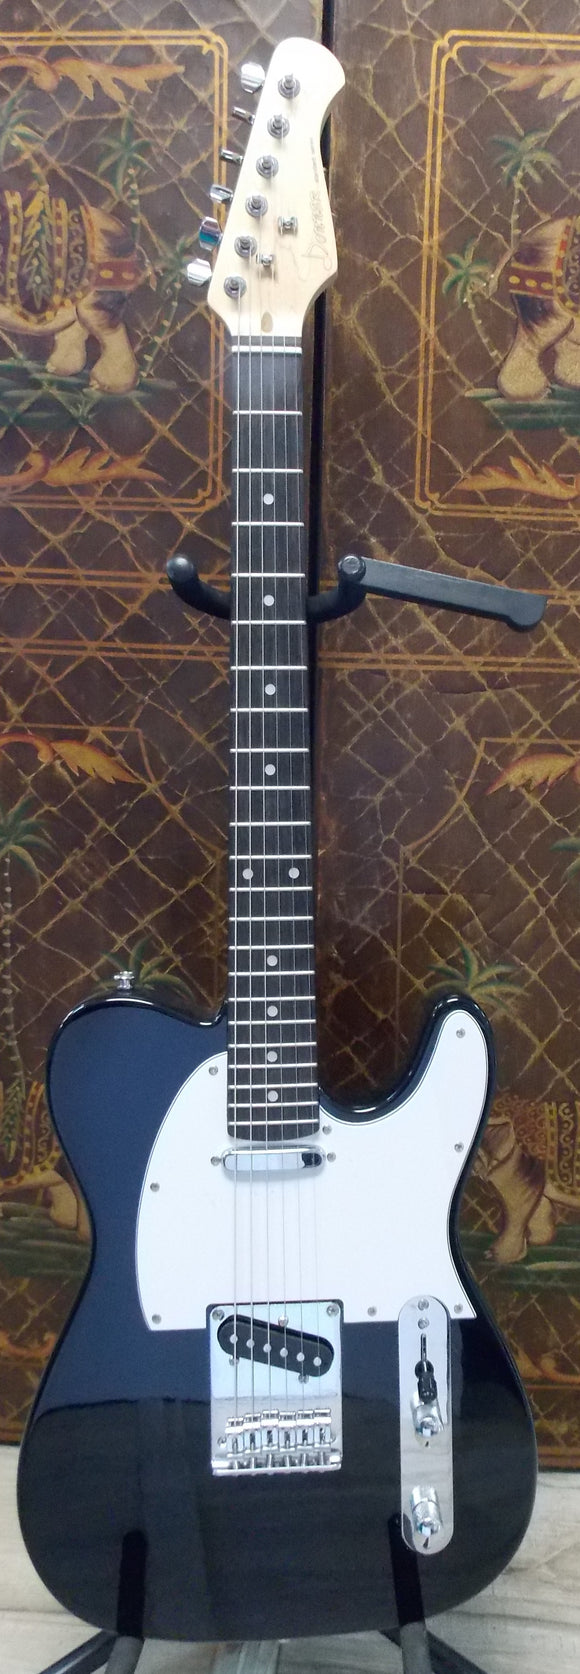 Donner Electric Guitar